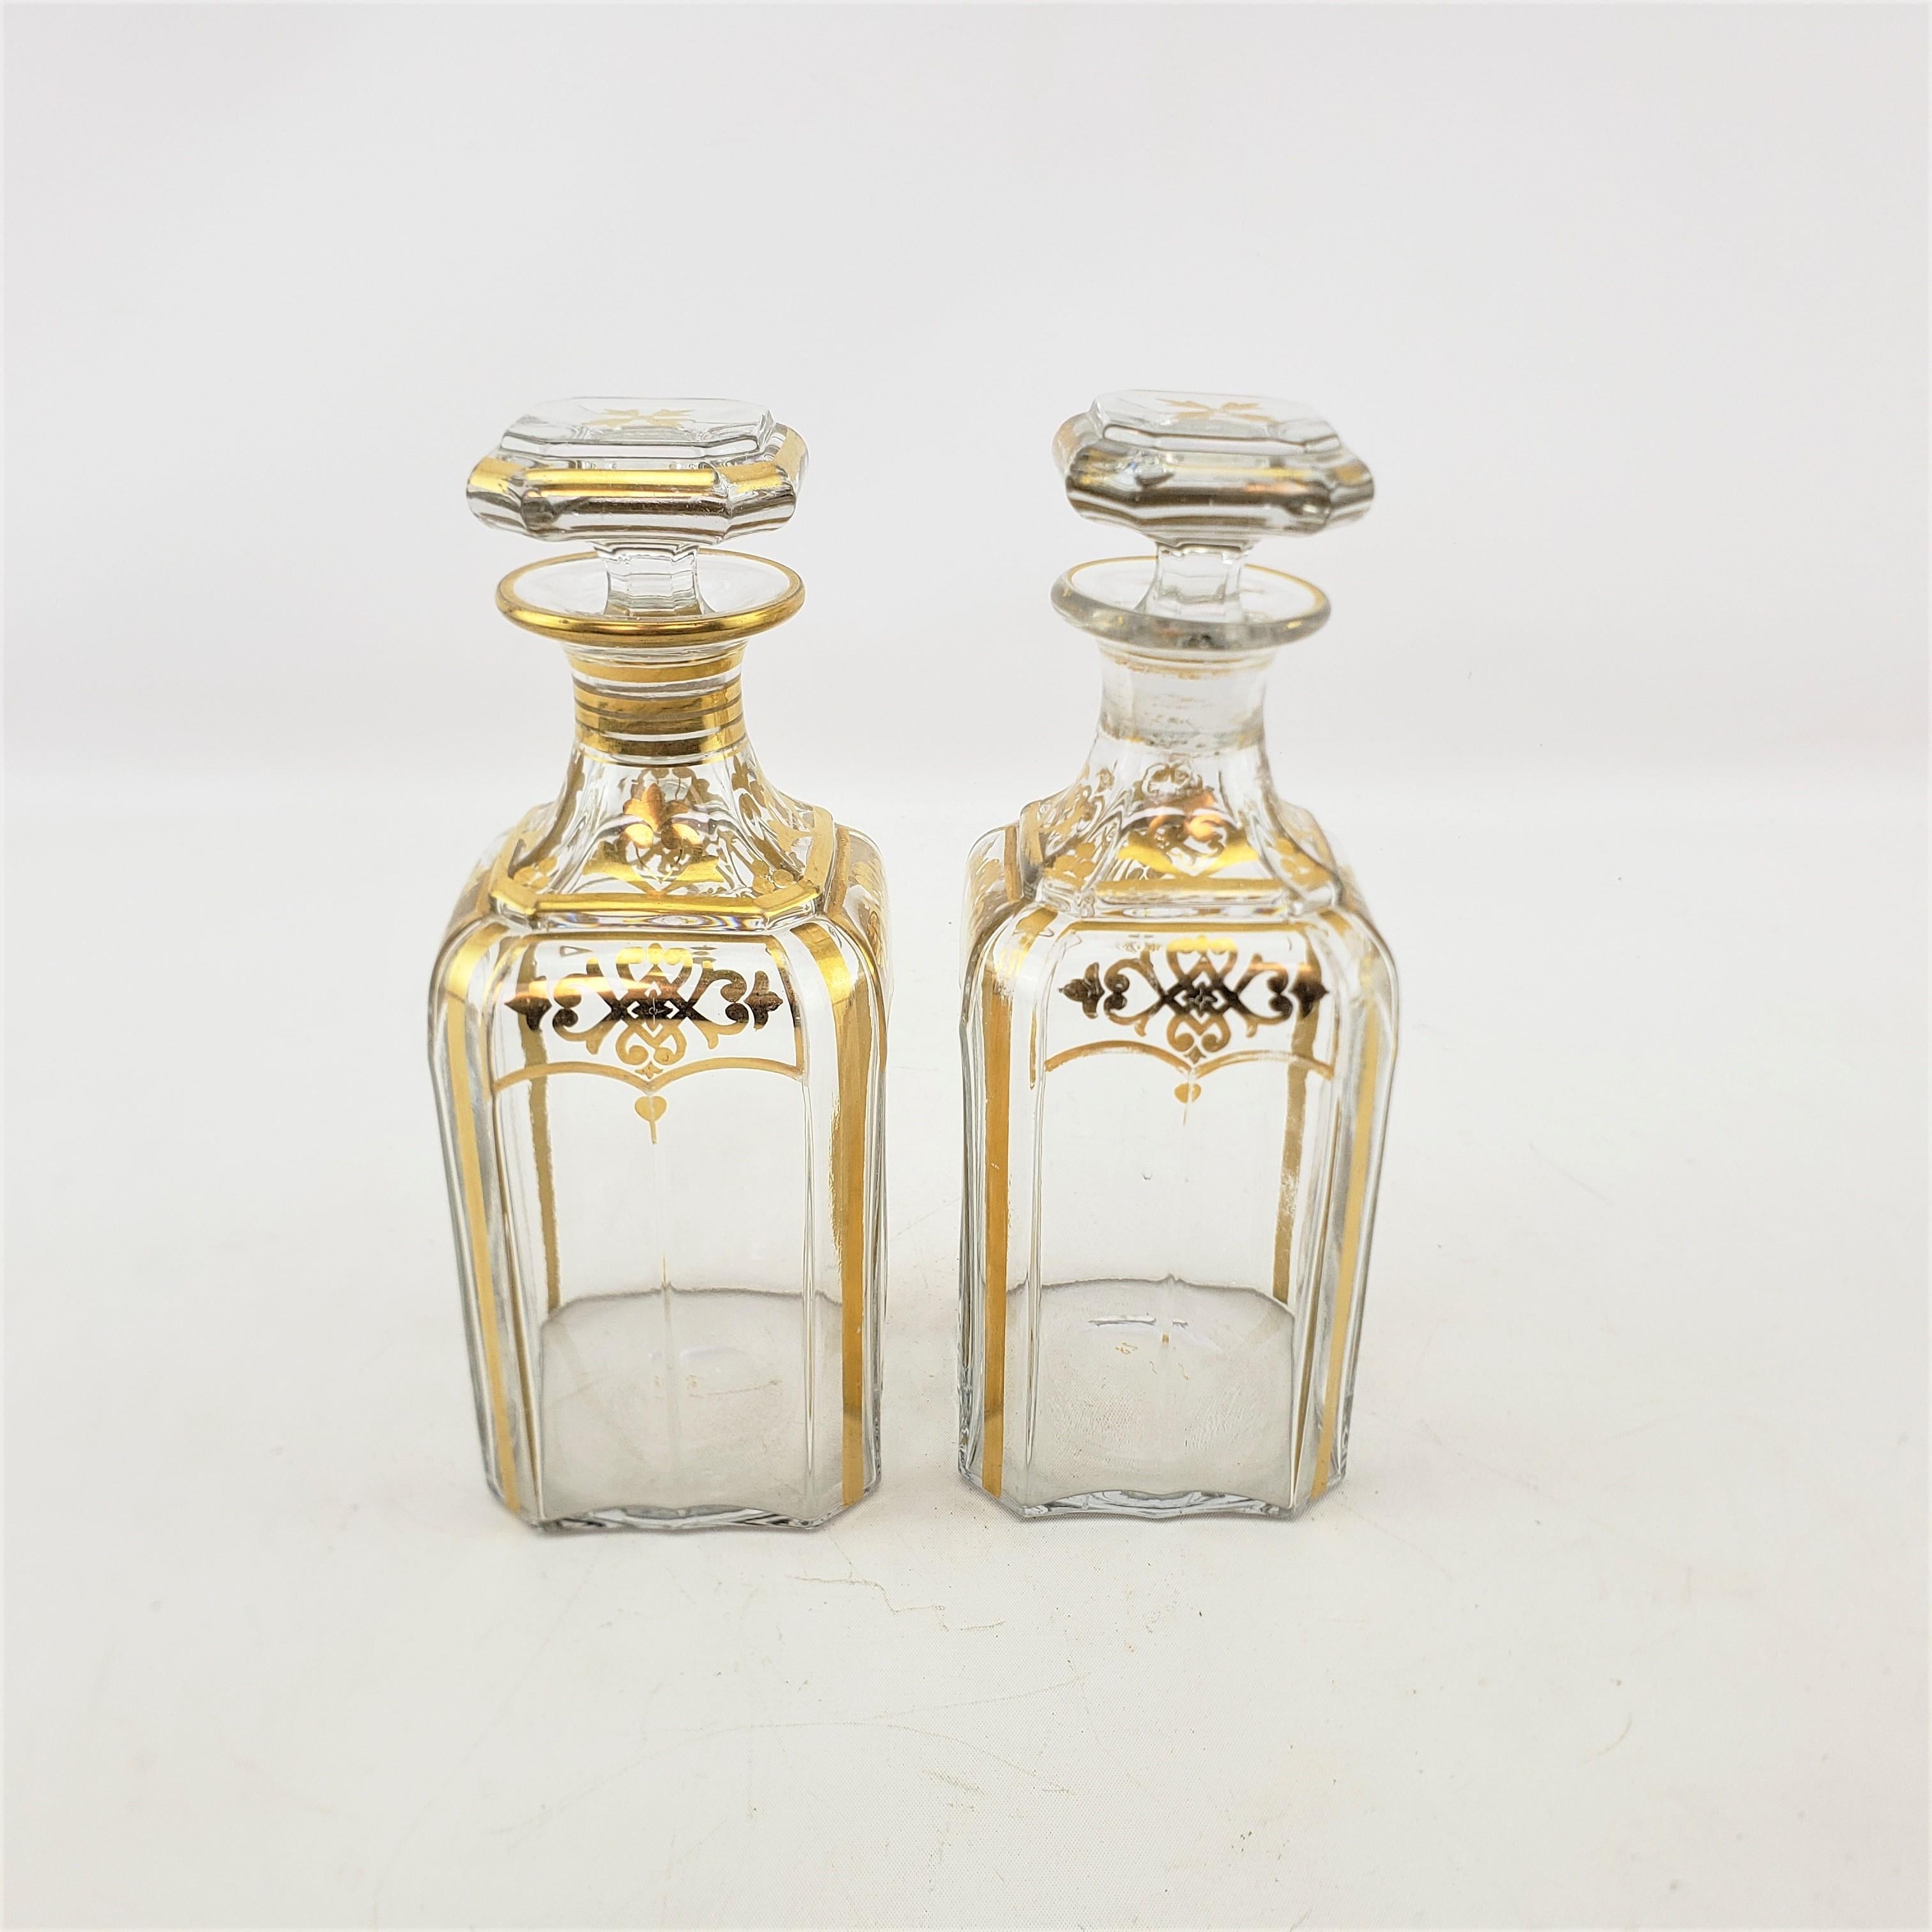 This pair of antique liquor bottle decanters are unsigned, but presumed to have originated from France and date to approximately 1900 and done in an Empire Revival style. The decanters are done with a clear crystal with clear stoppers which have